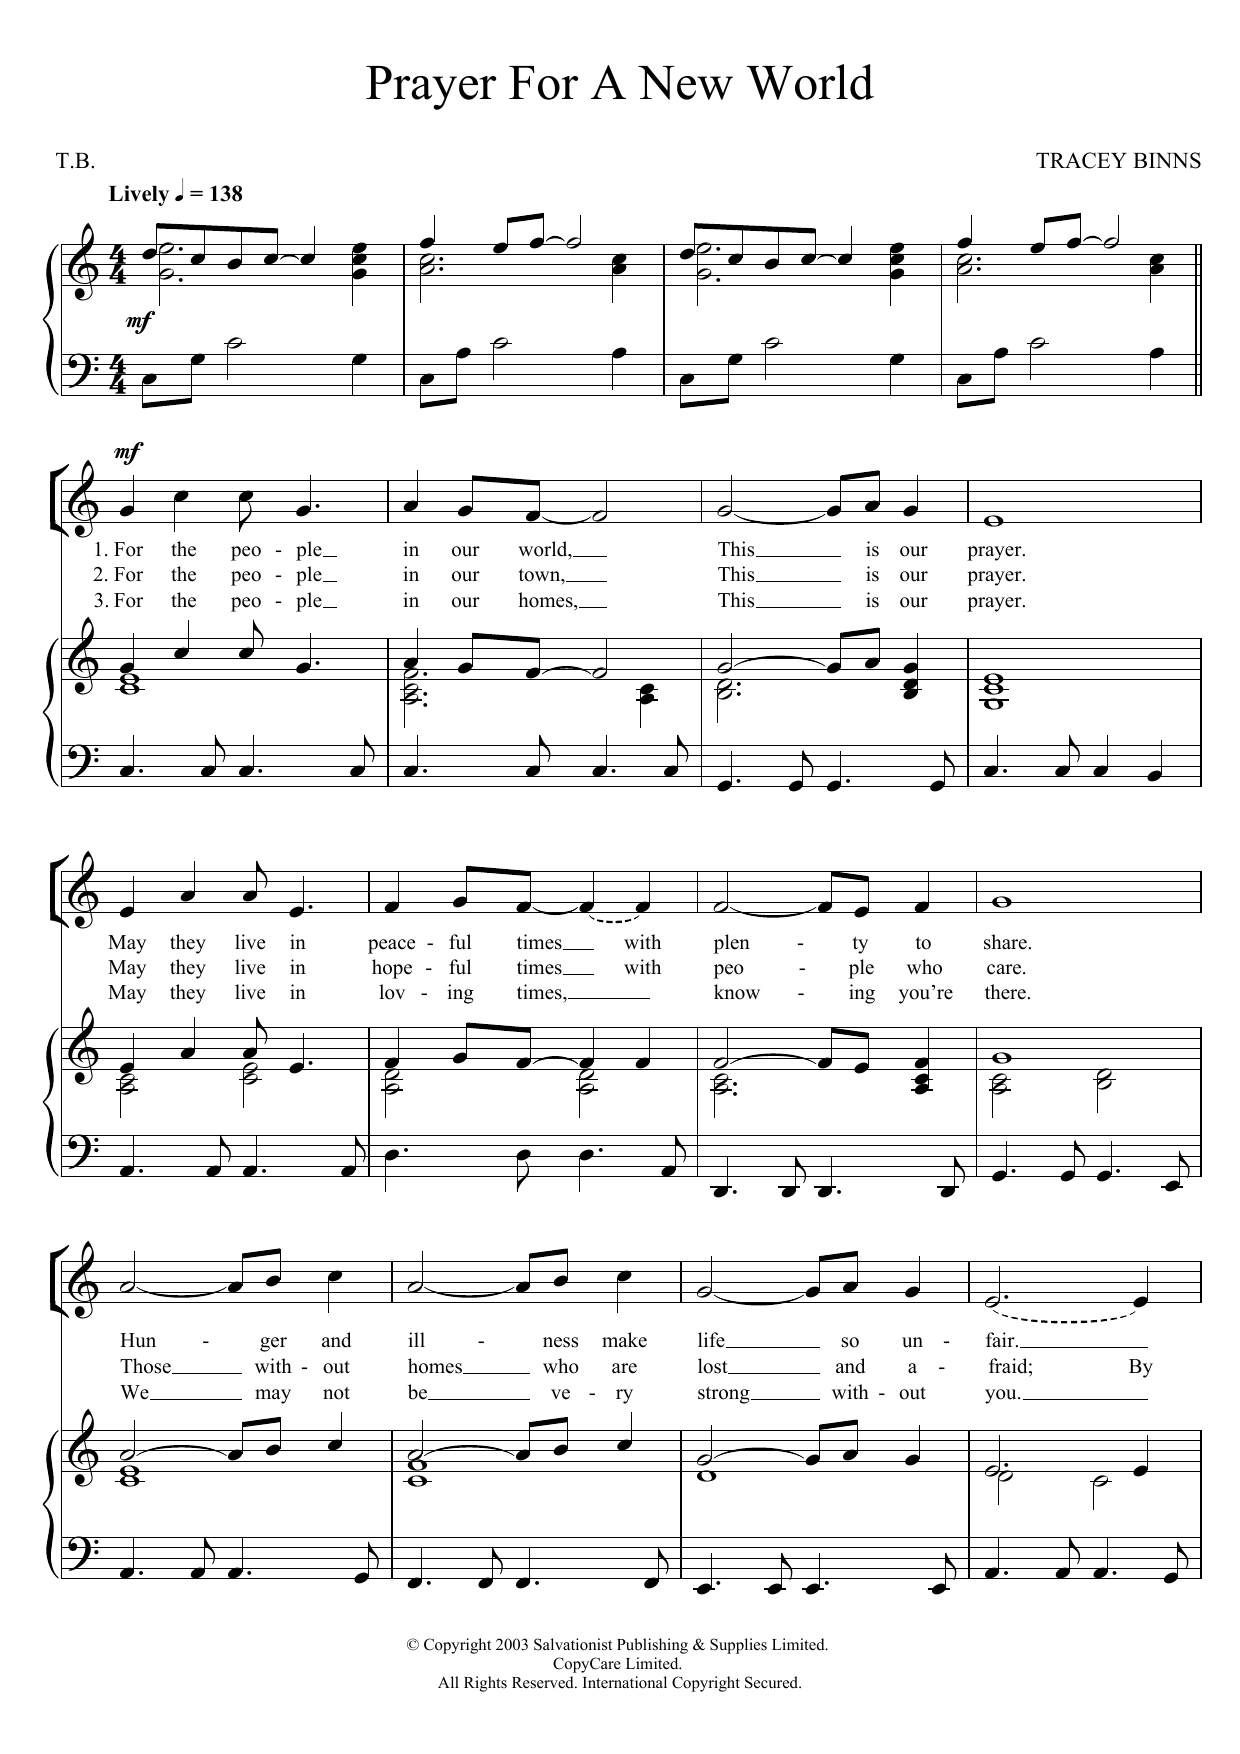 Download The Salvation Army Prayer For A New World Sheet Music